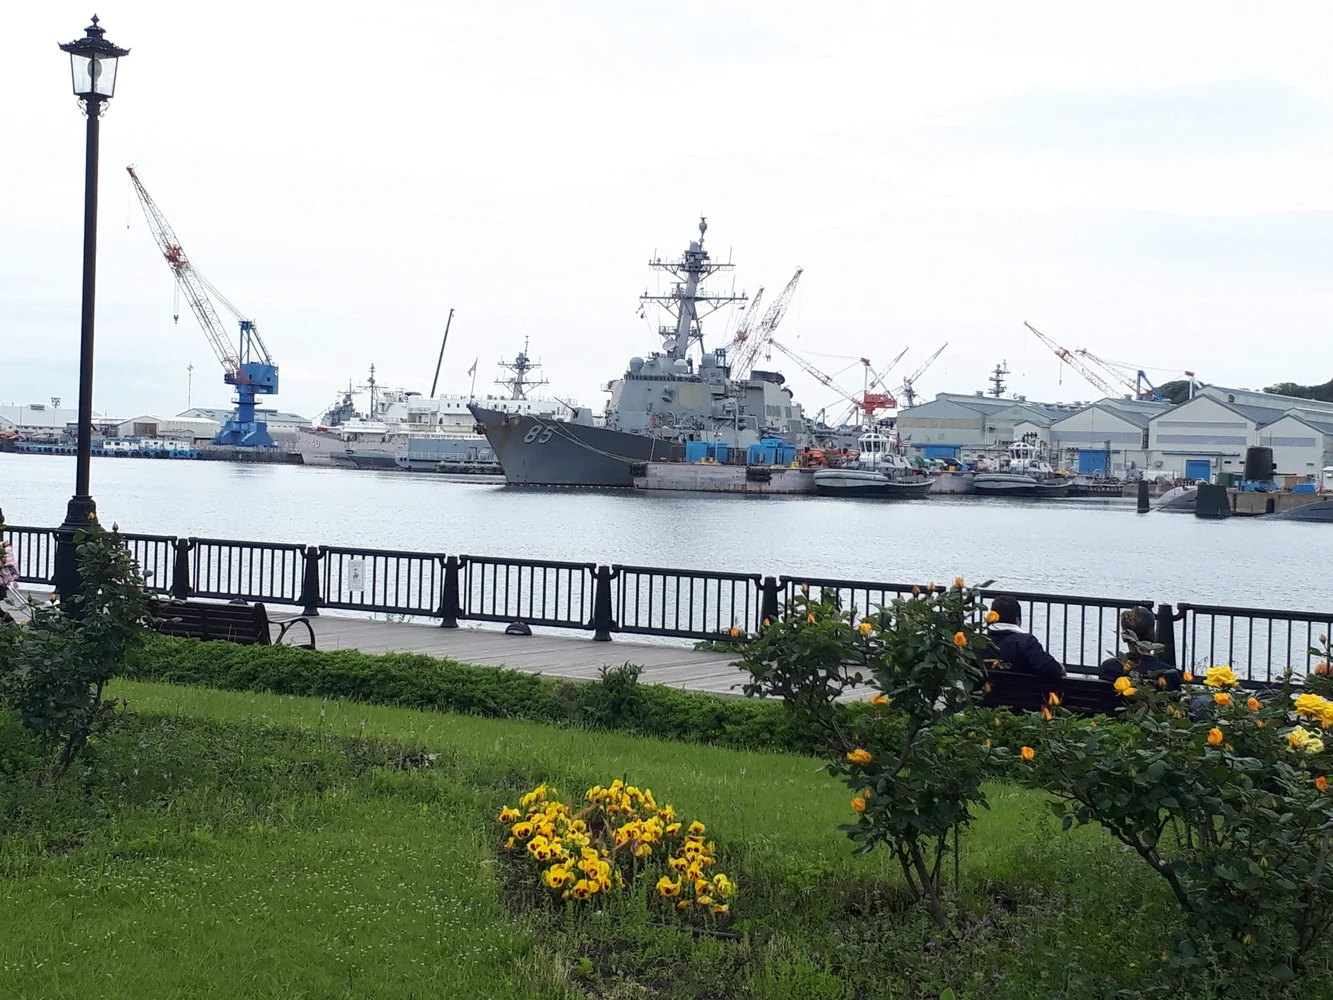 Discover Ancient Kamakura and the Naval History of Yokosuka on a 1-Day Private Tour